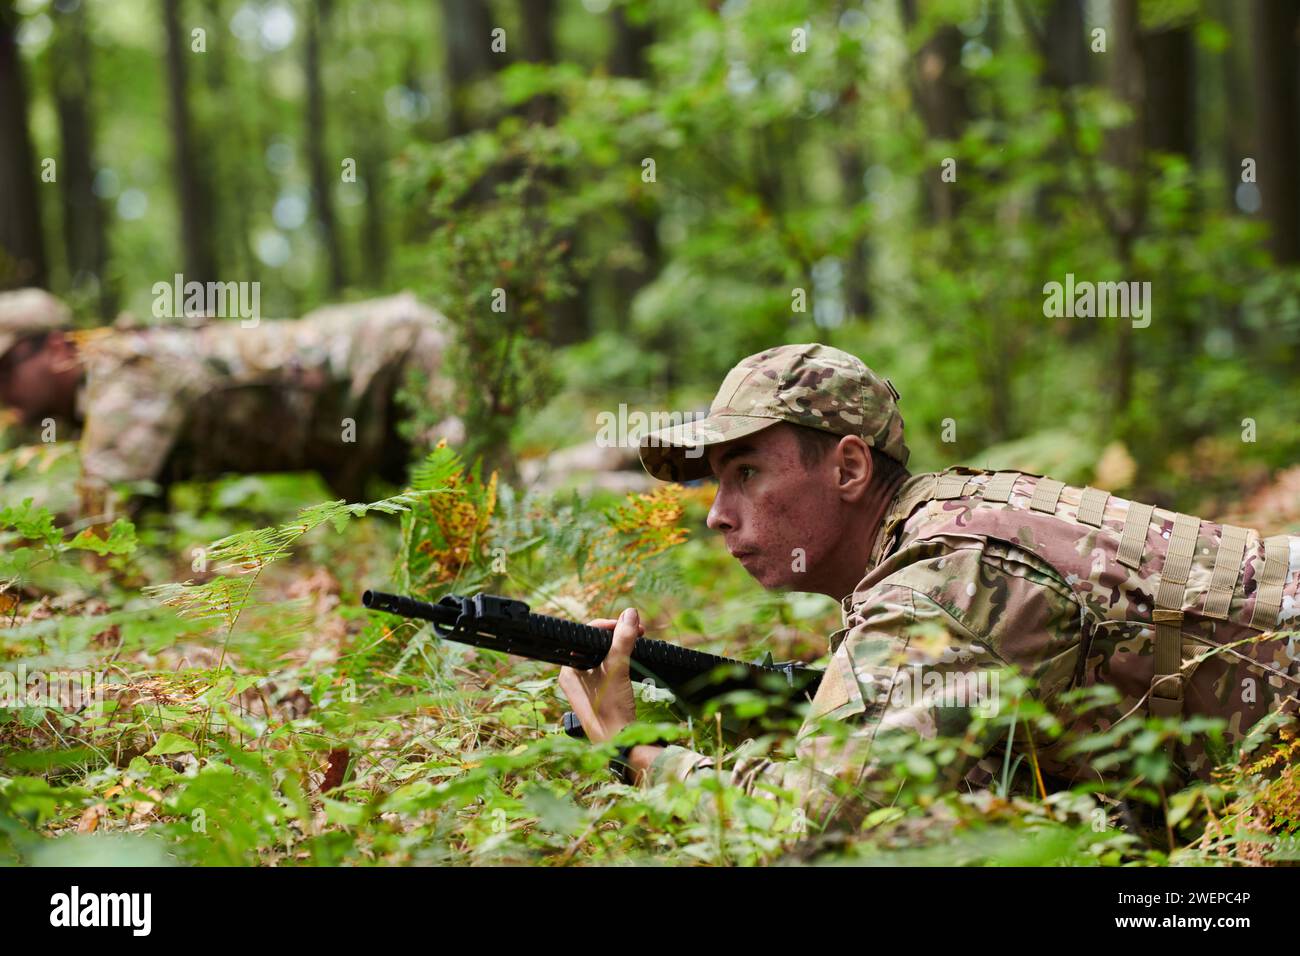 Elite soldiers stealthily maneuver through the dense forest, camouflaged in specialized gear, as they embark on a covert and strategic military Stock Photo